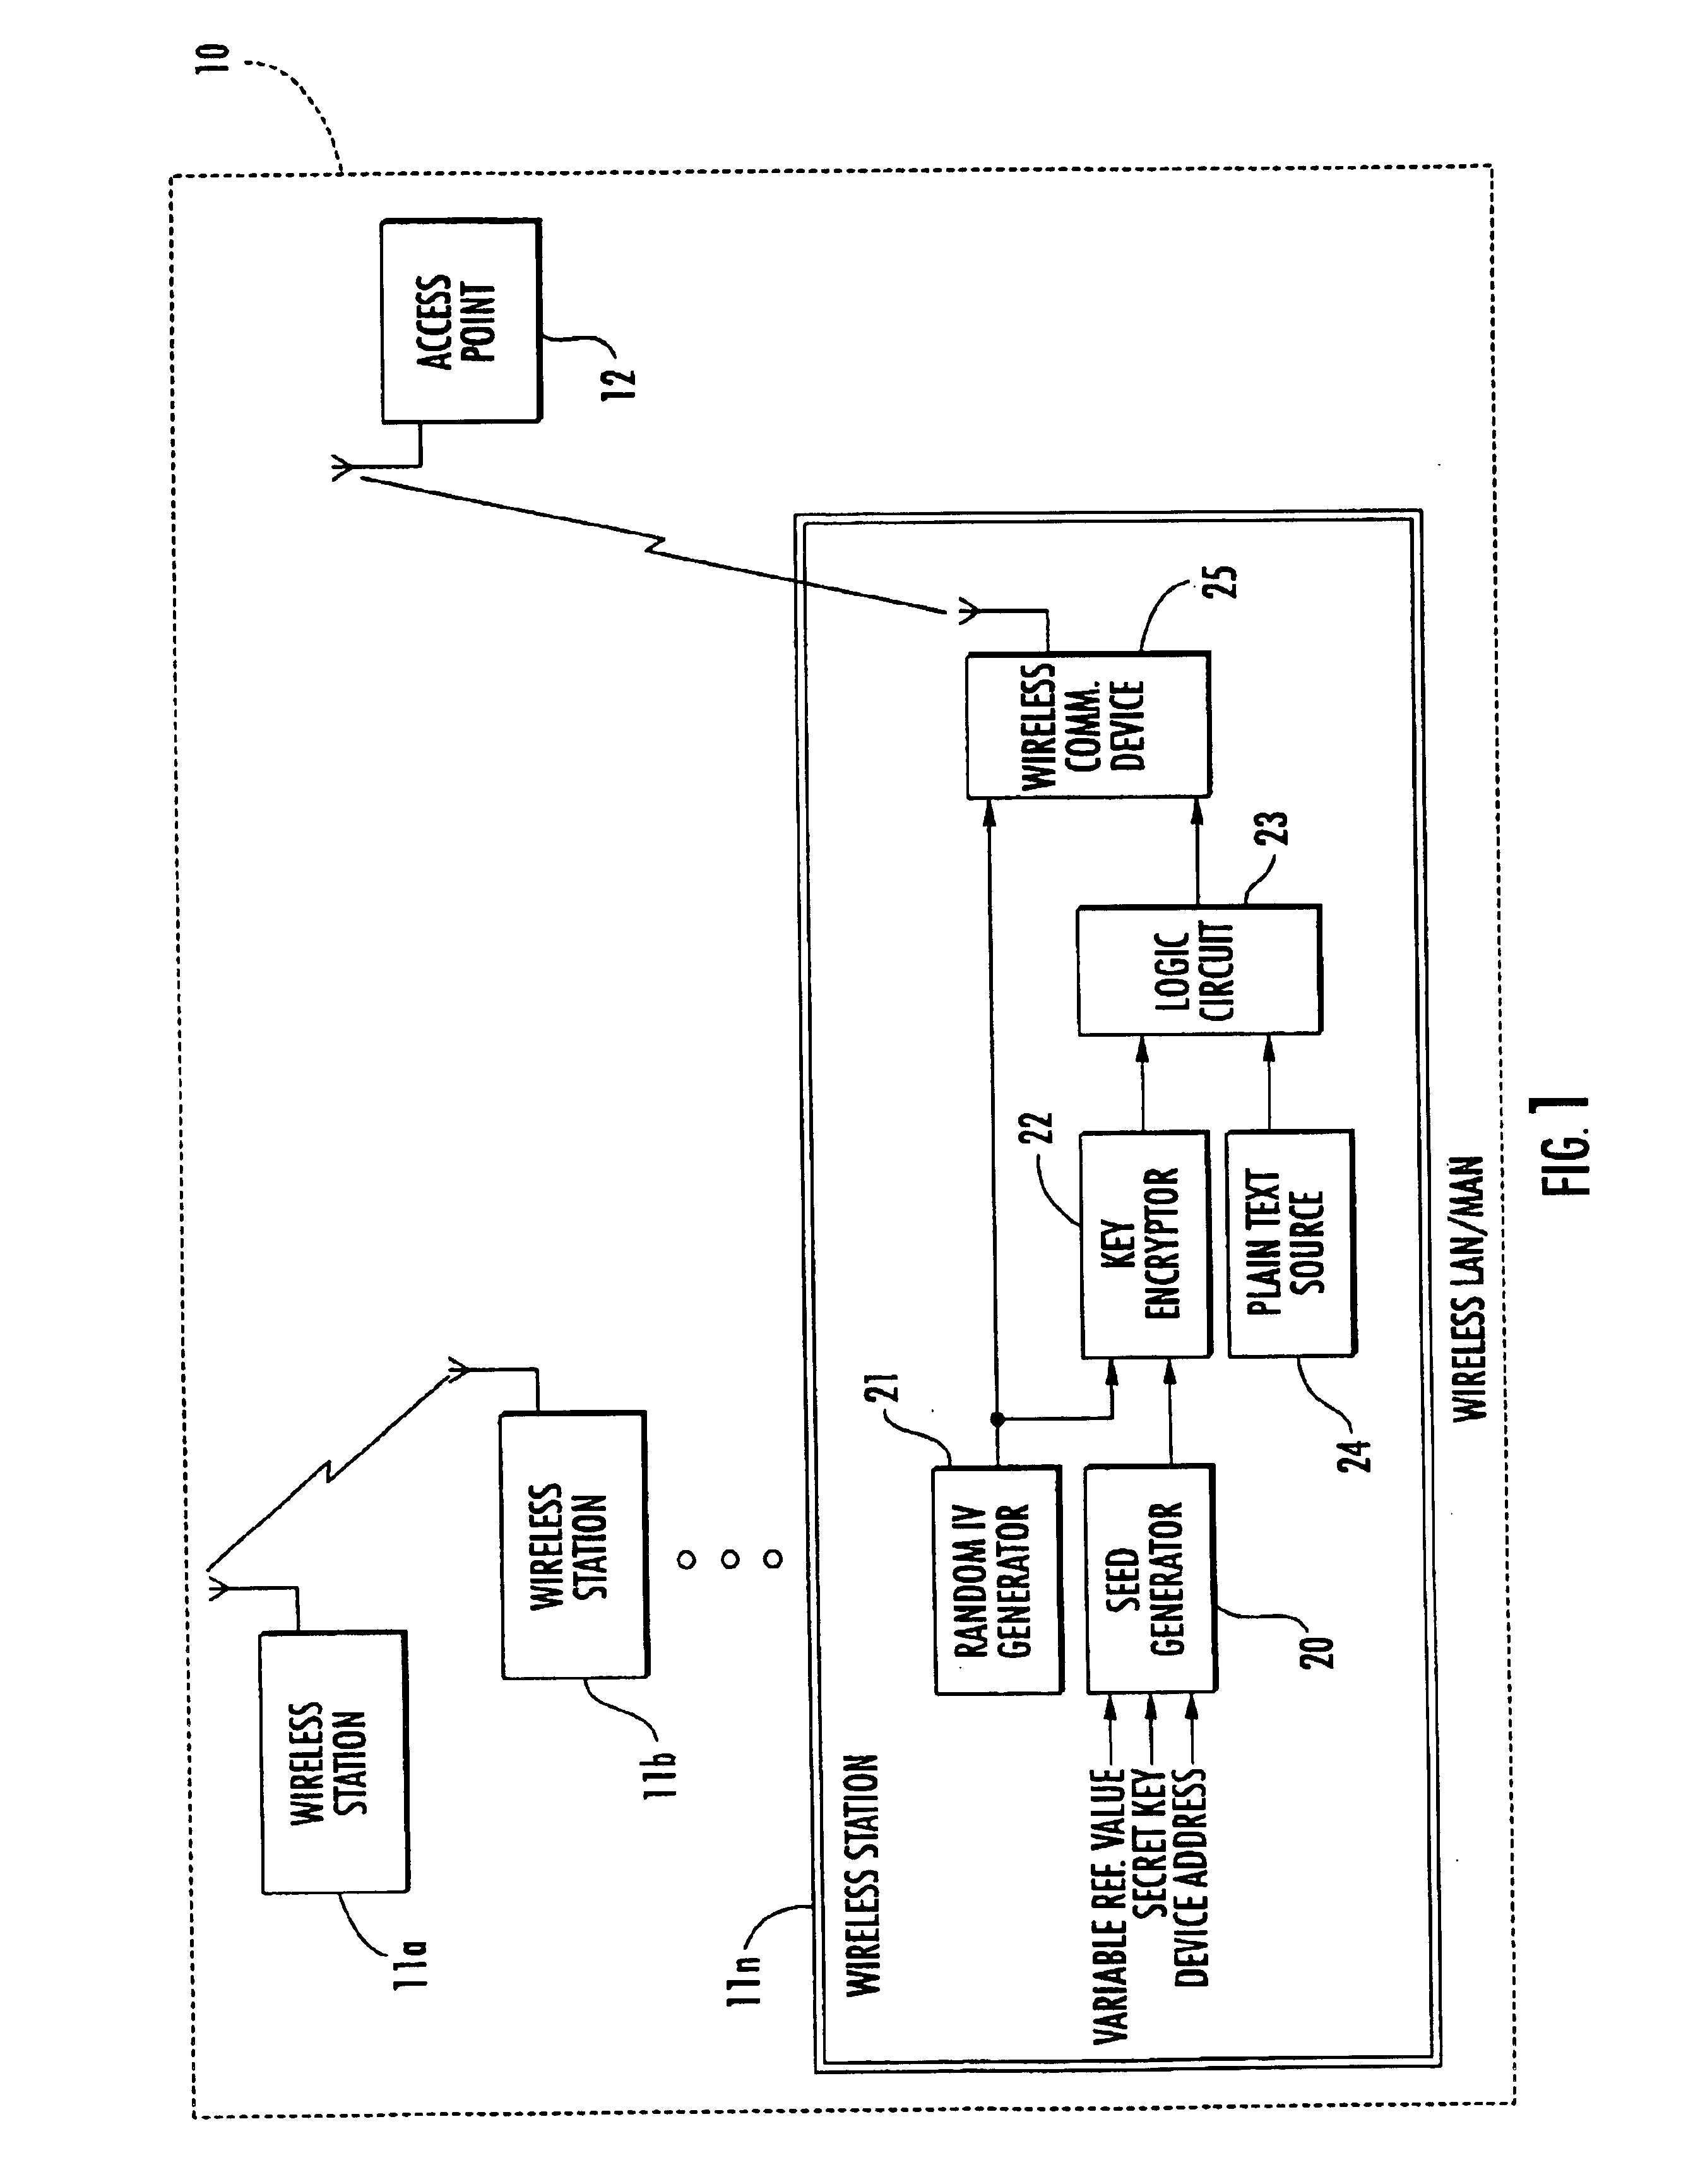 Secure wireless local or metropolitan area network and related methods